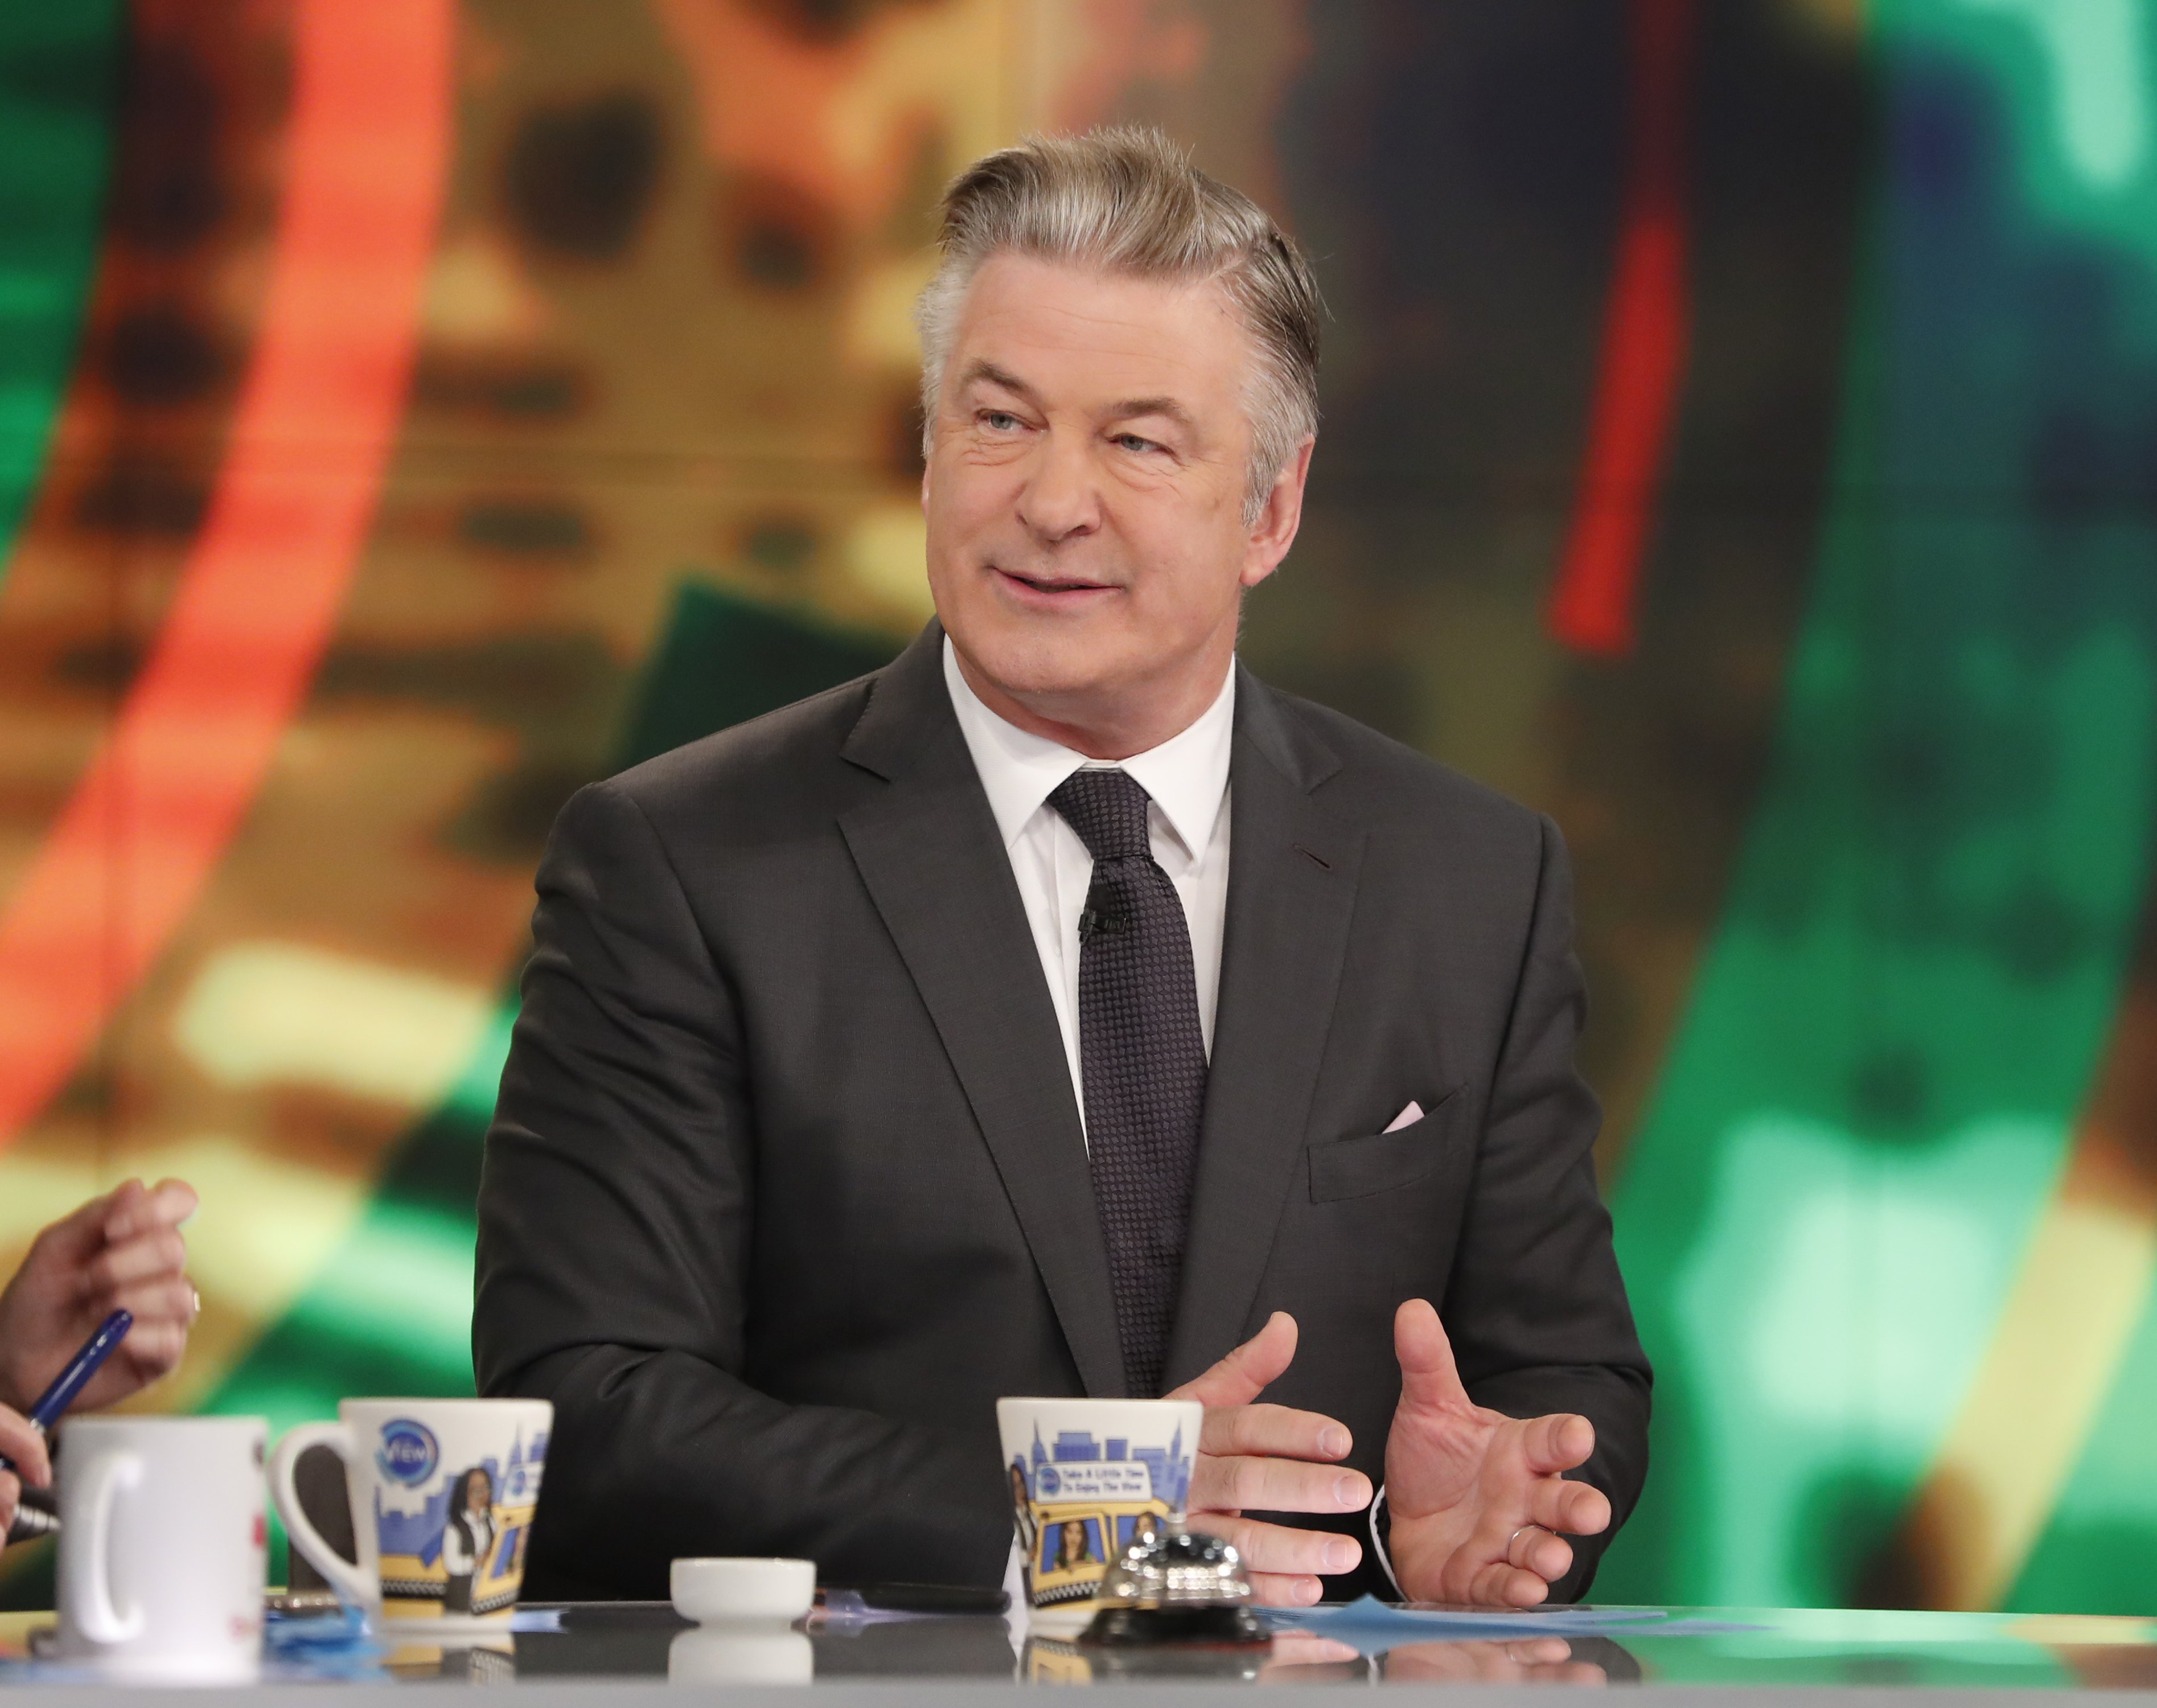 Alec Baldwin co-hosting "The View" in 2020. | Photo: Getty Images